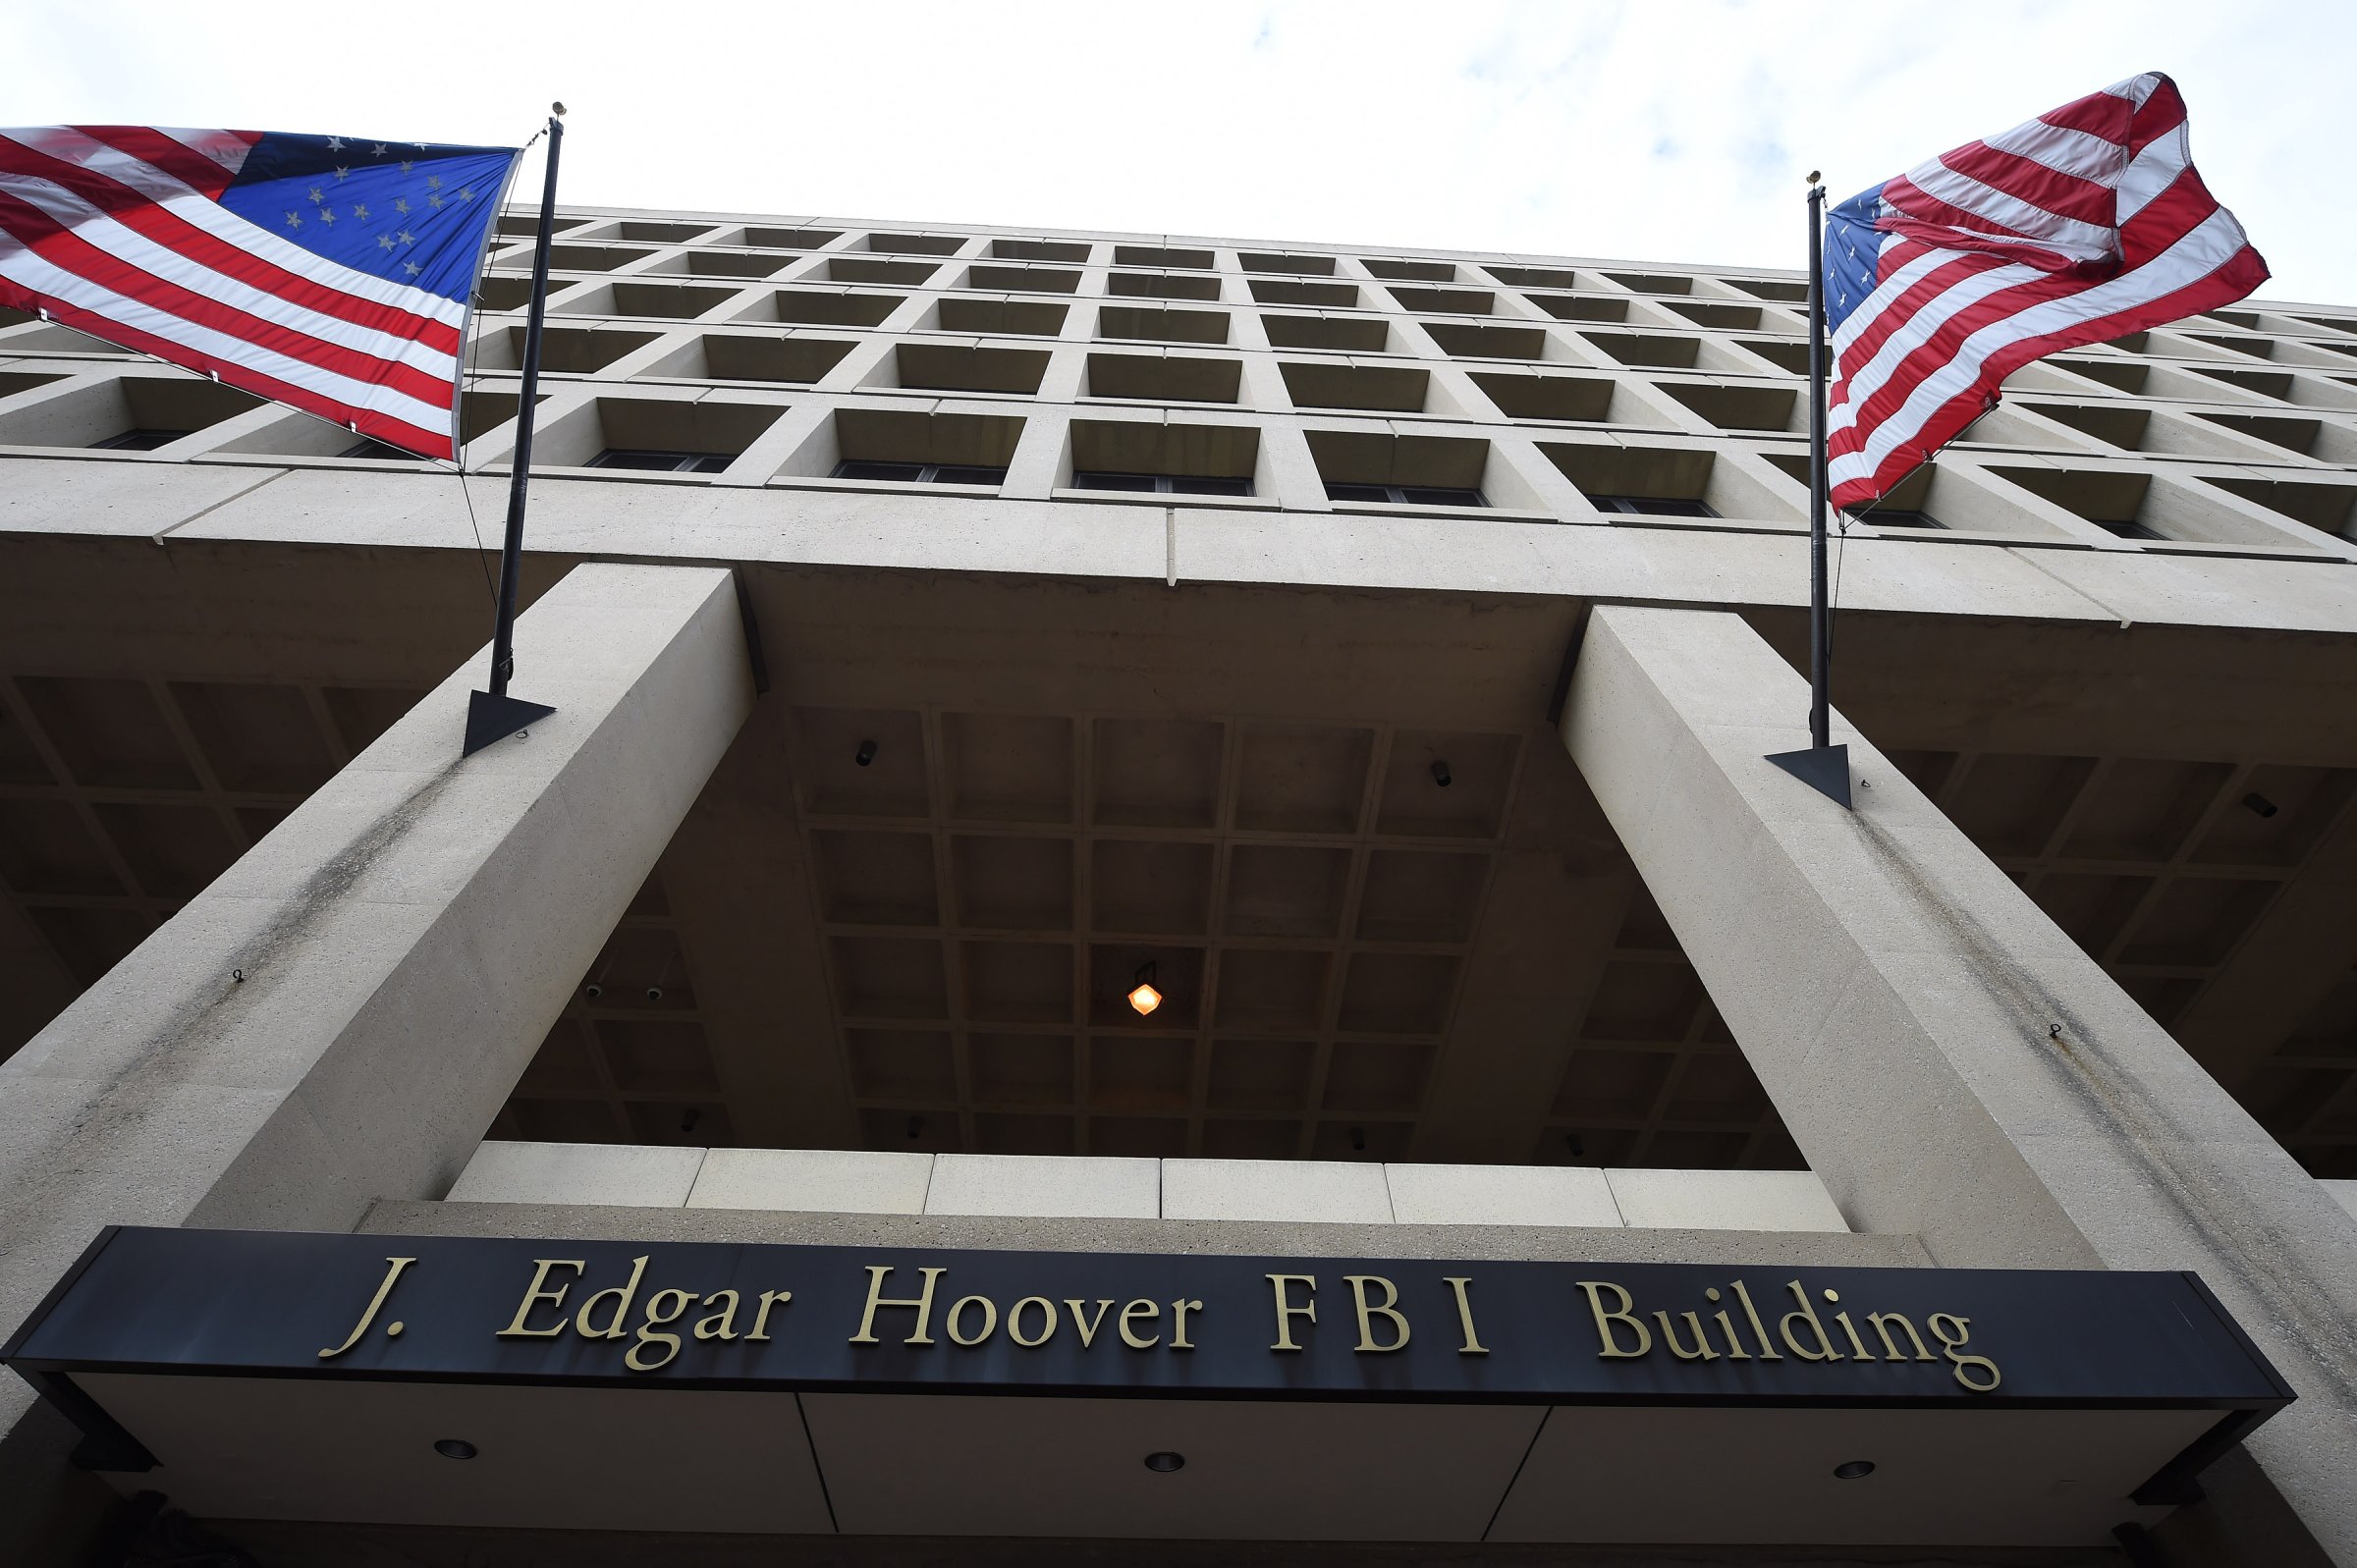 The exterior of the J. Edgar Hoover Building, which is the headquarters of the FBI, on Aug. 20, 2015 in Washington, D.C.